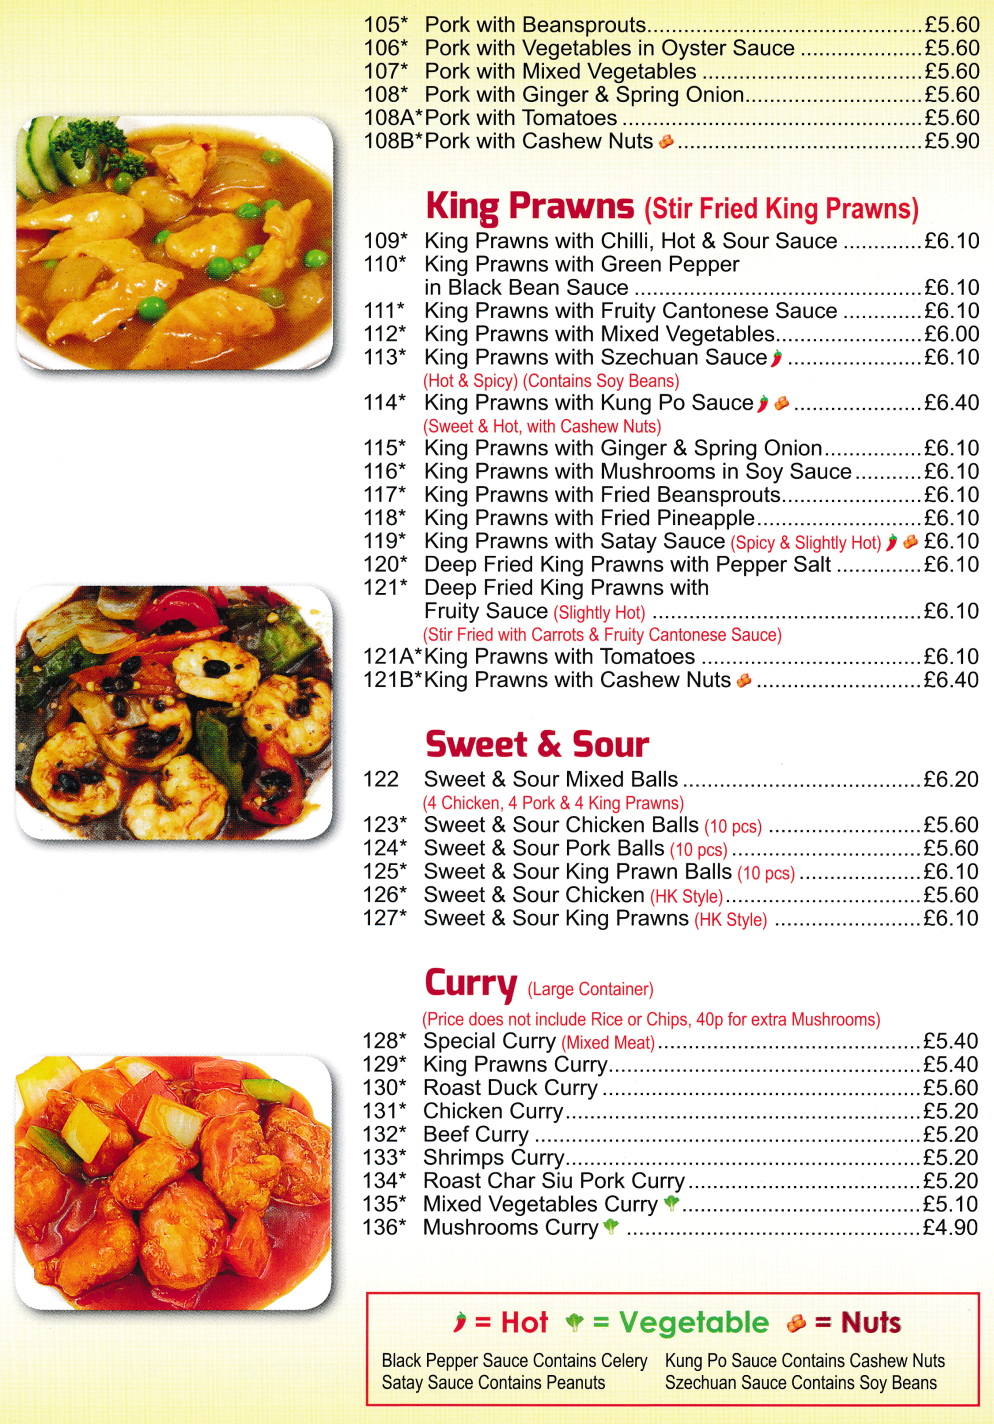 Menu for Diamond City - Sweet & Sour Pork Balls, King Prawn with Satay Sauce, Pork with Cashew Nuts, Chicken Curry..